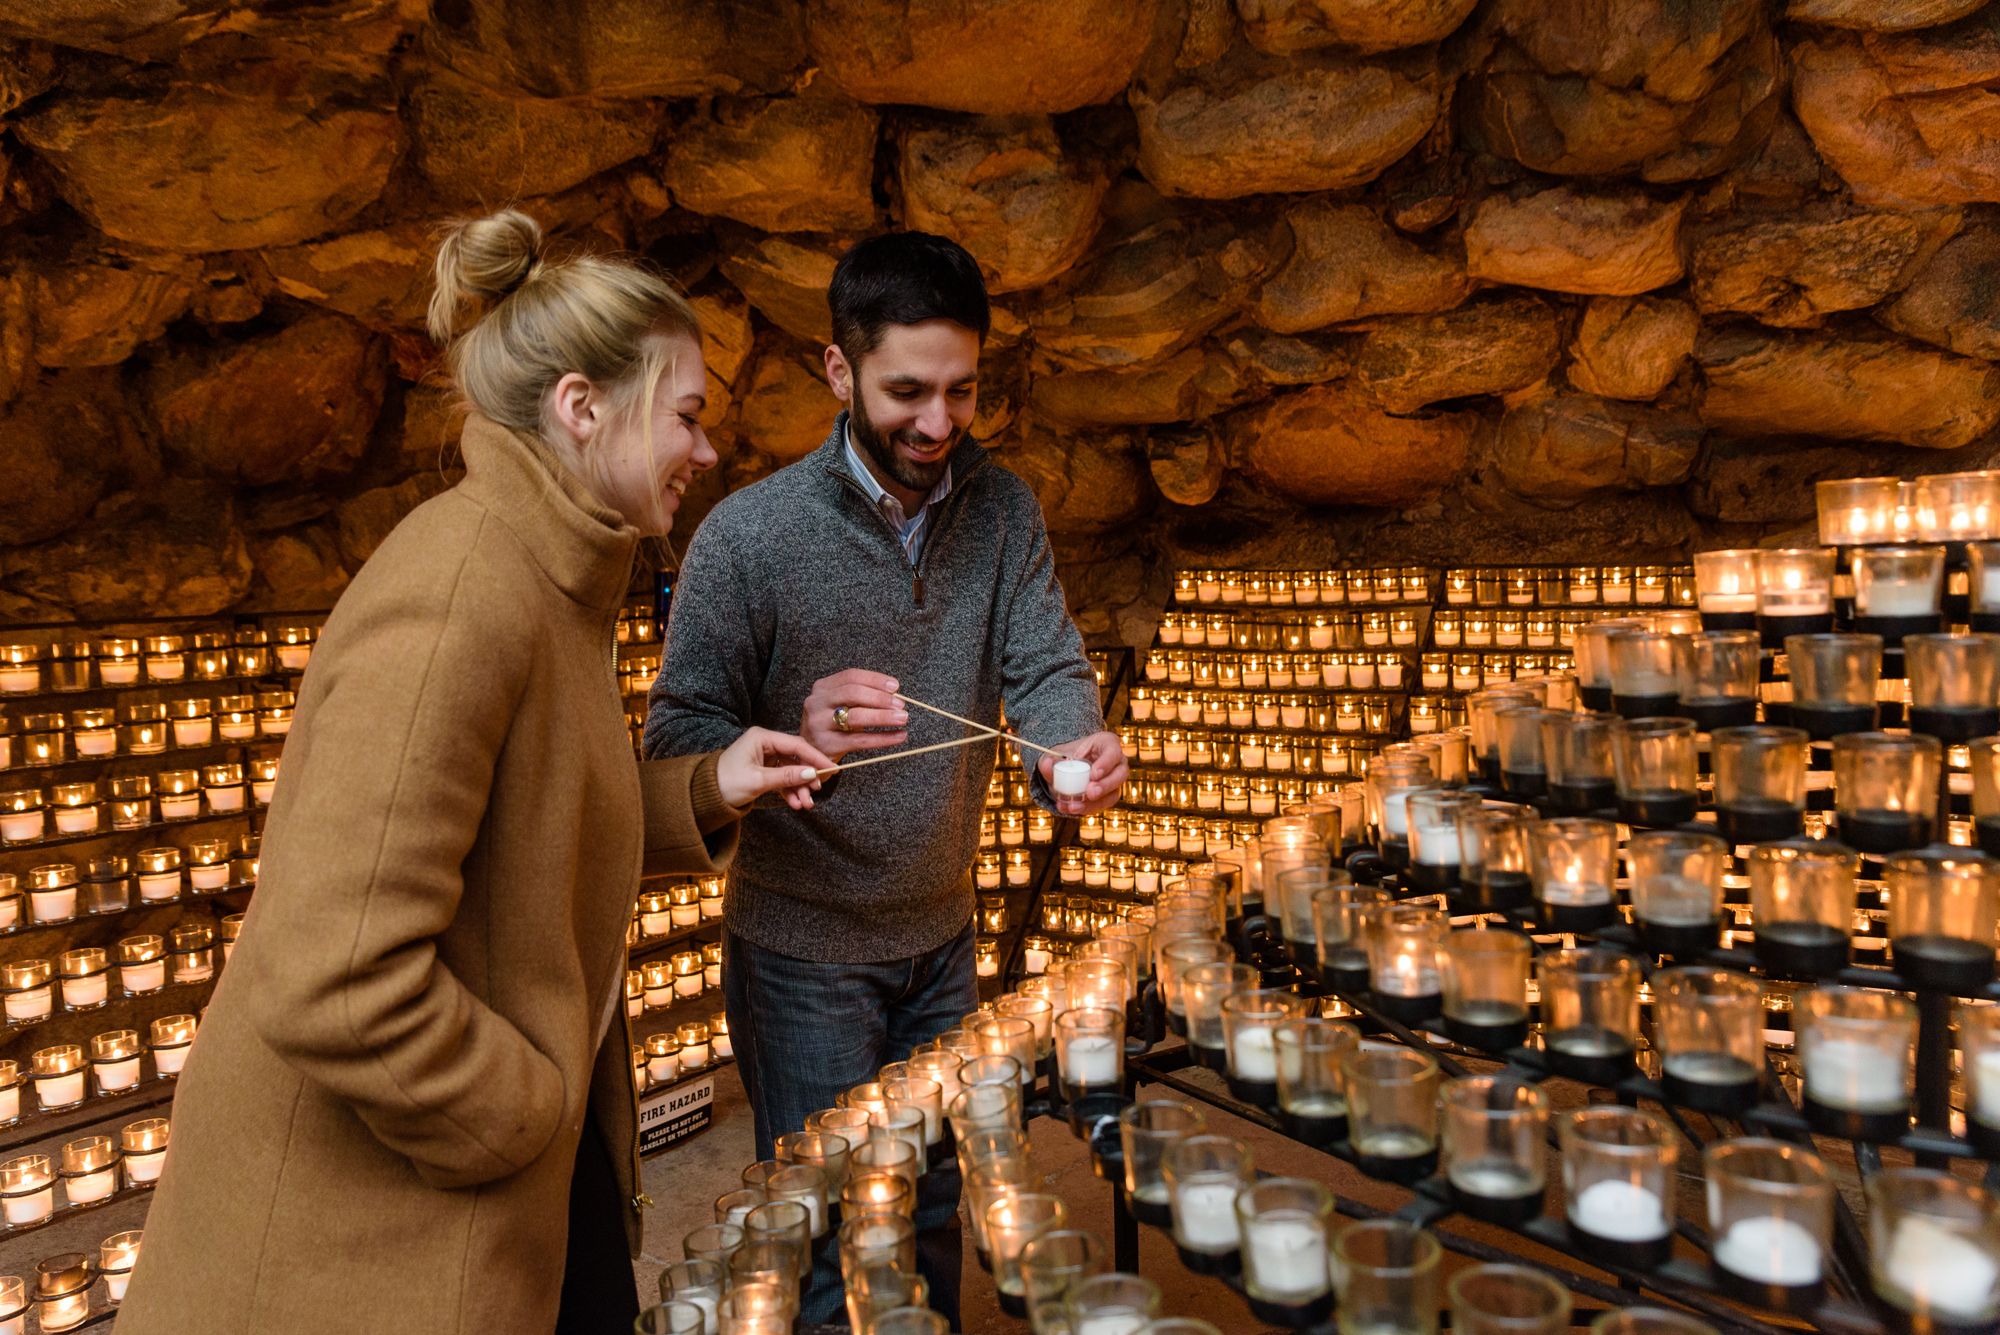 Newly engaged couple lighting a candle at the Grotto on the campus of the University of Notre Dame